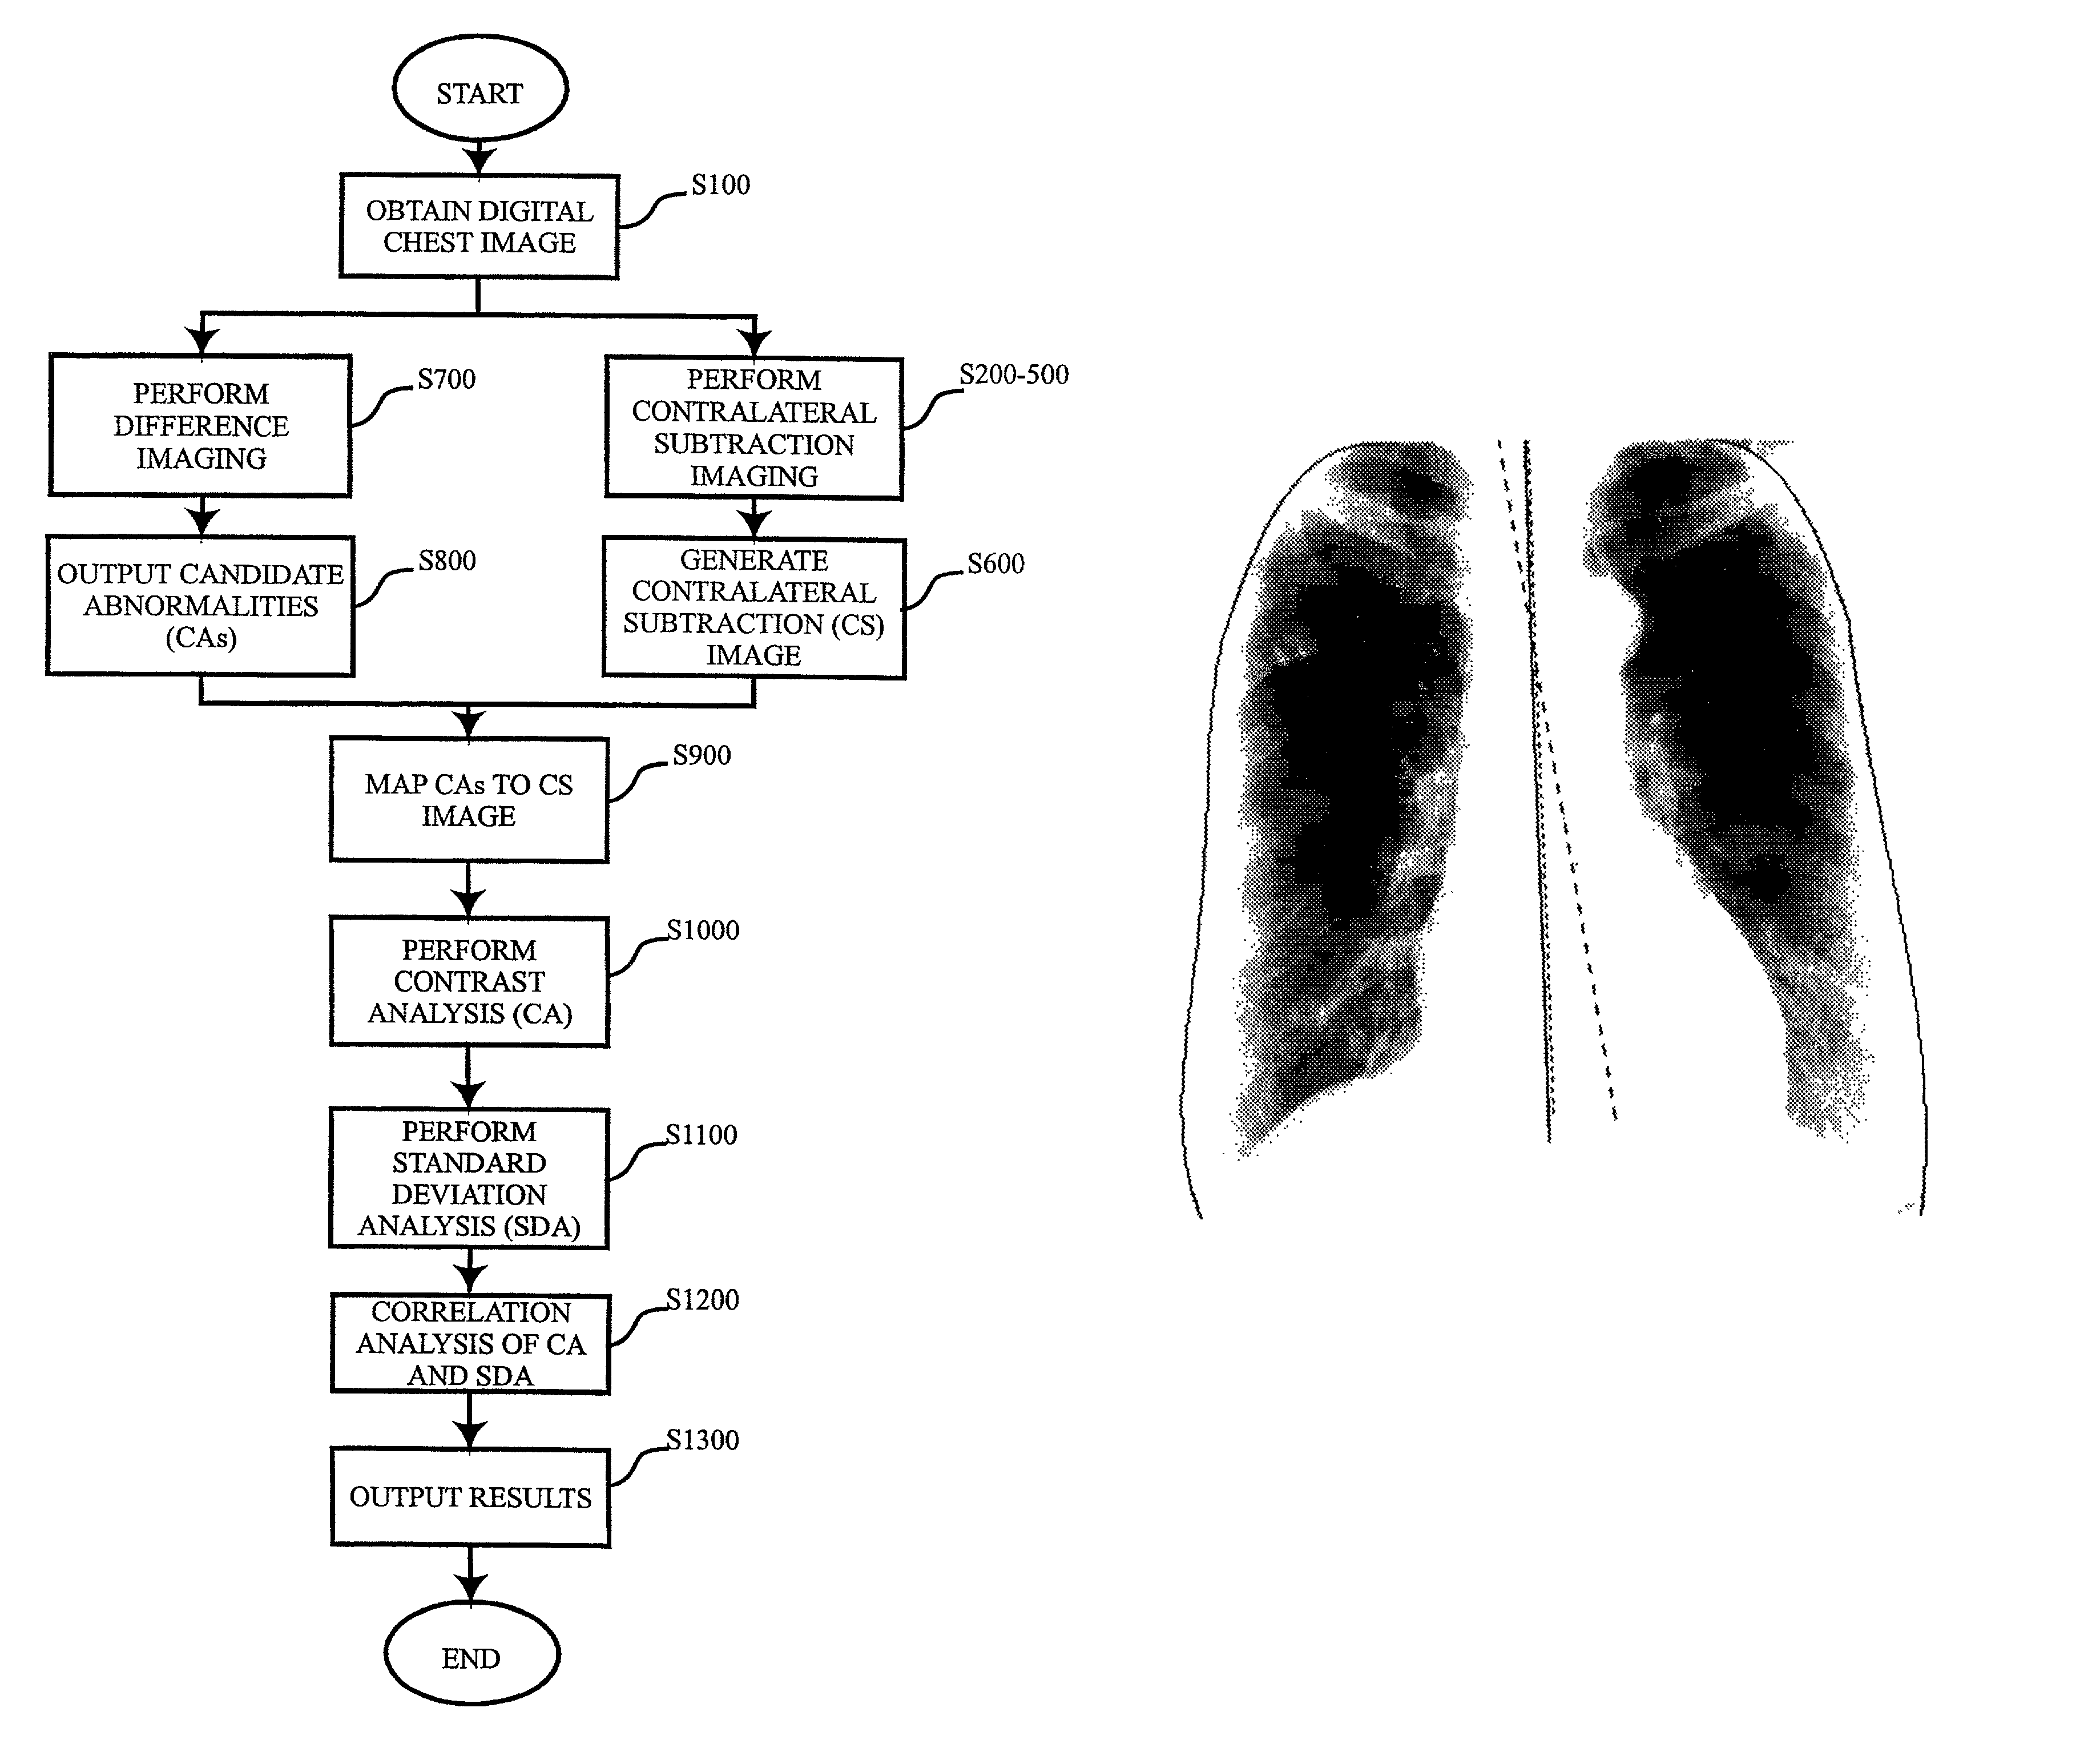 System for computerized processing of chest radiographic images